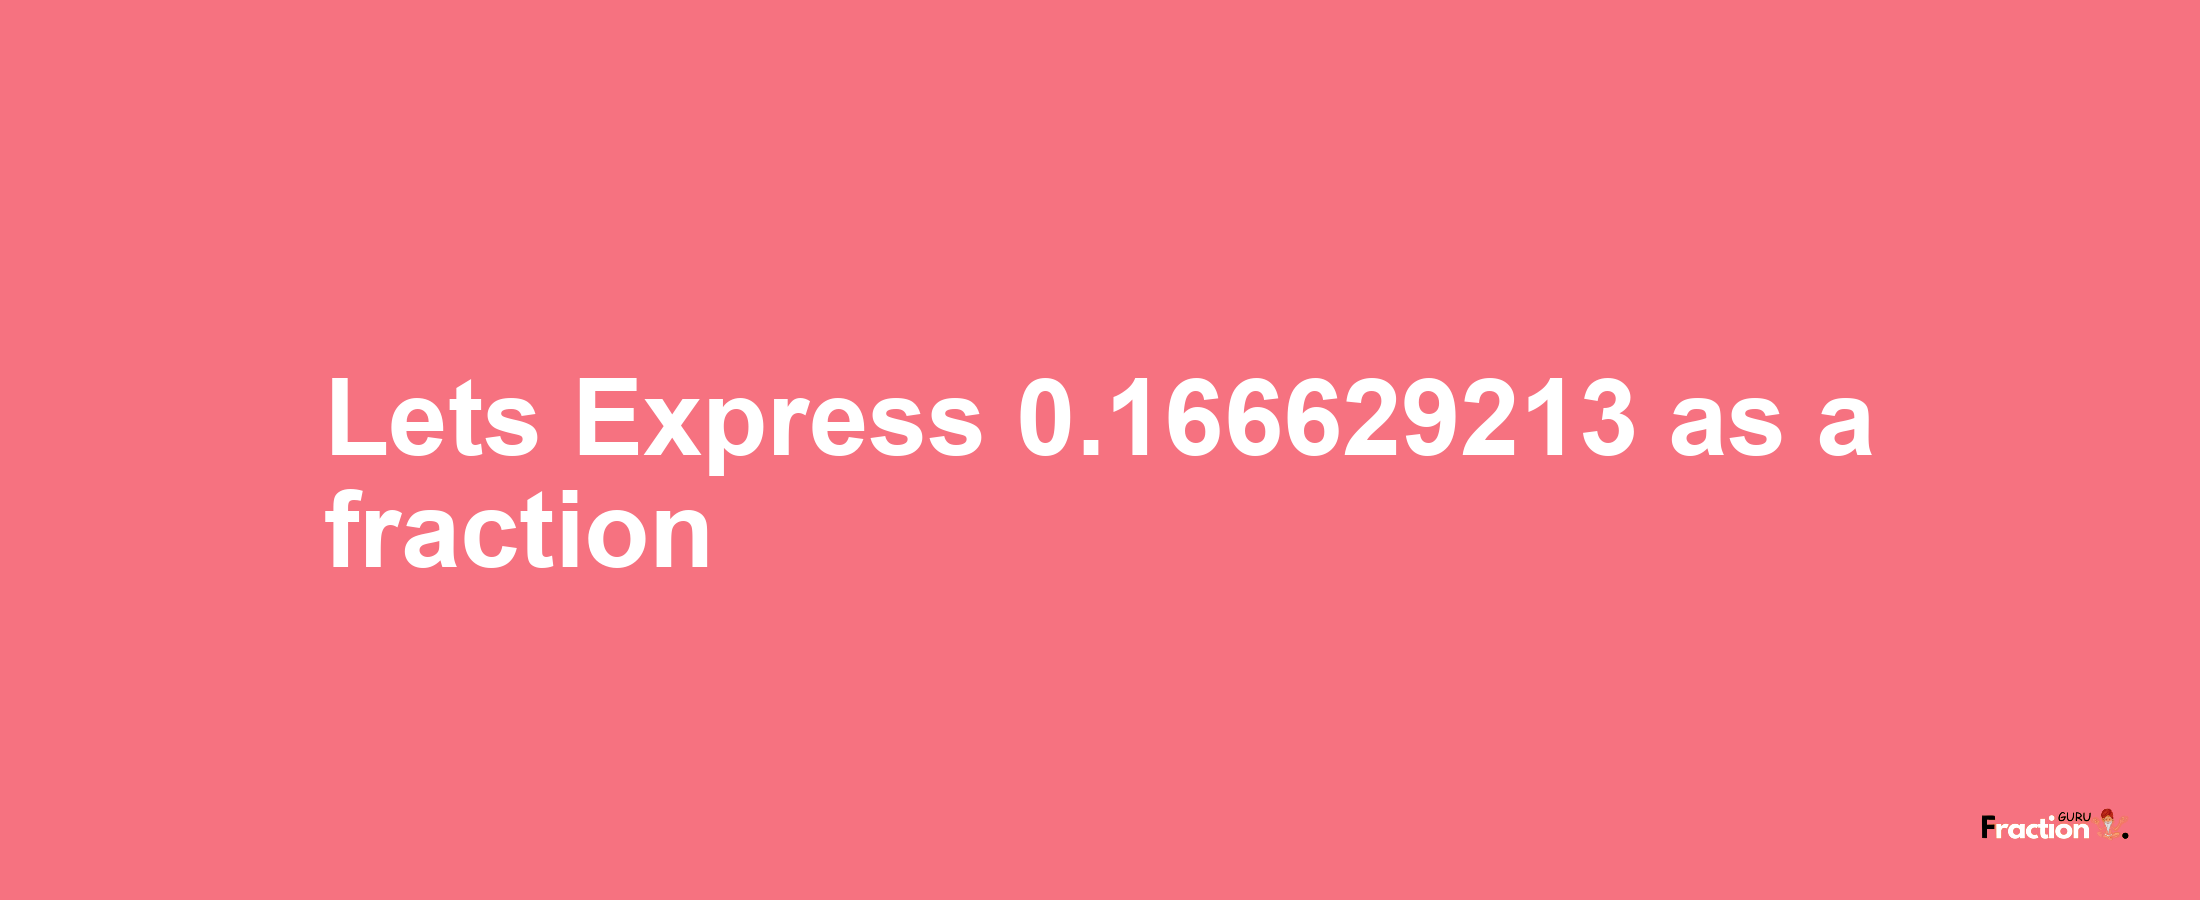 Lets Express 0.166629213 as afraction